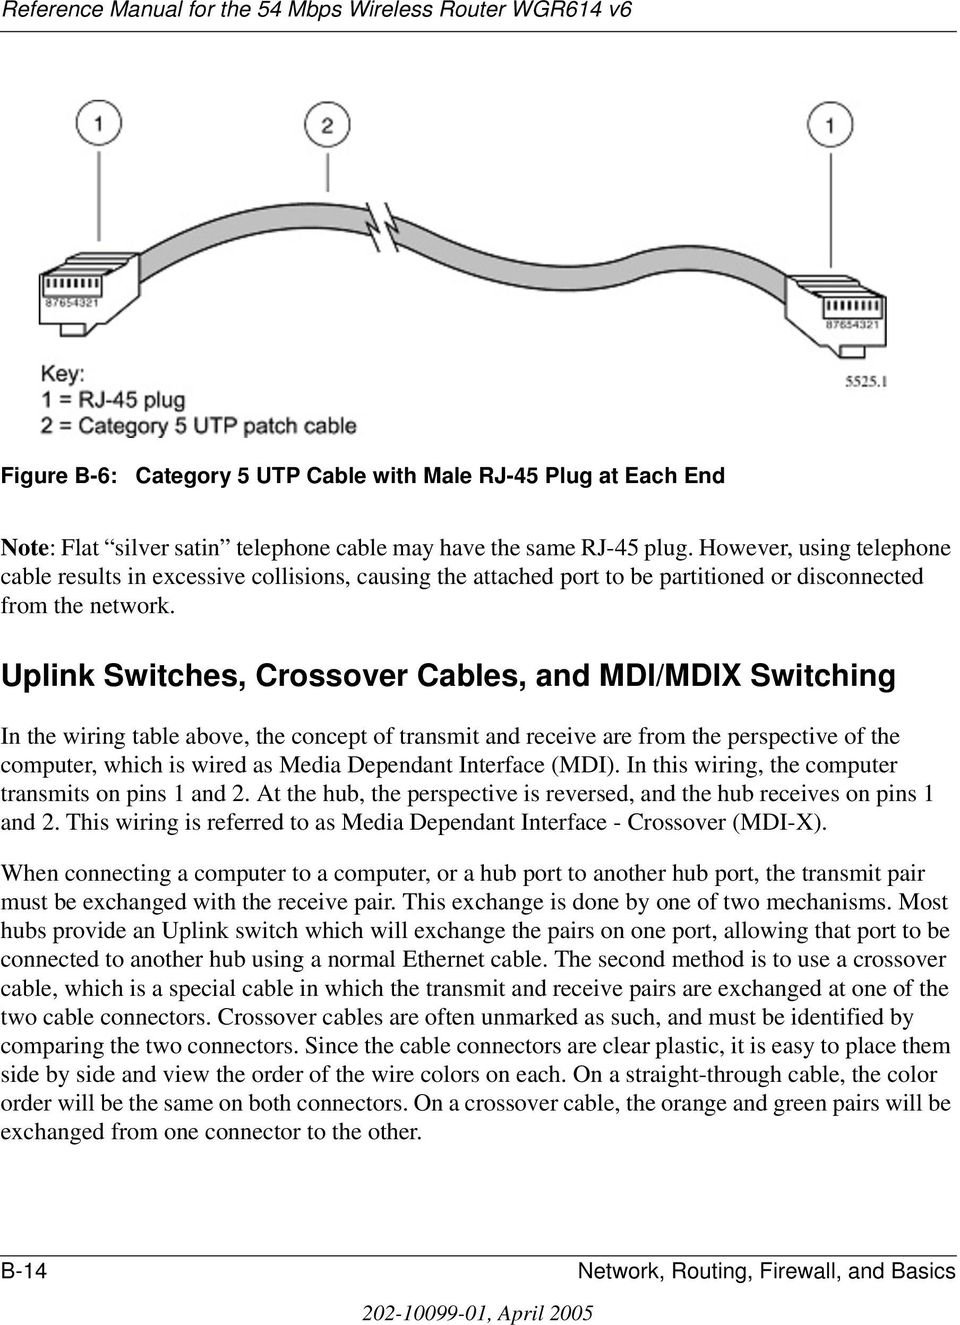 Uplink Switches, Crossover Cables, and MDI/MDIX Switching In the wiring table above, the concept of transmit and receive are from the perspective of the computer, which is wired as Media Dependant